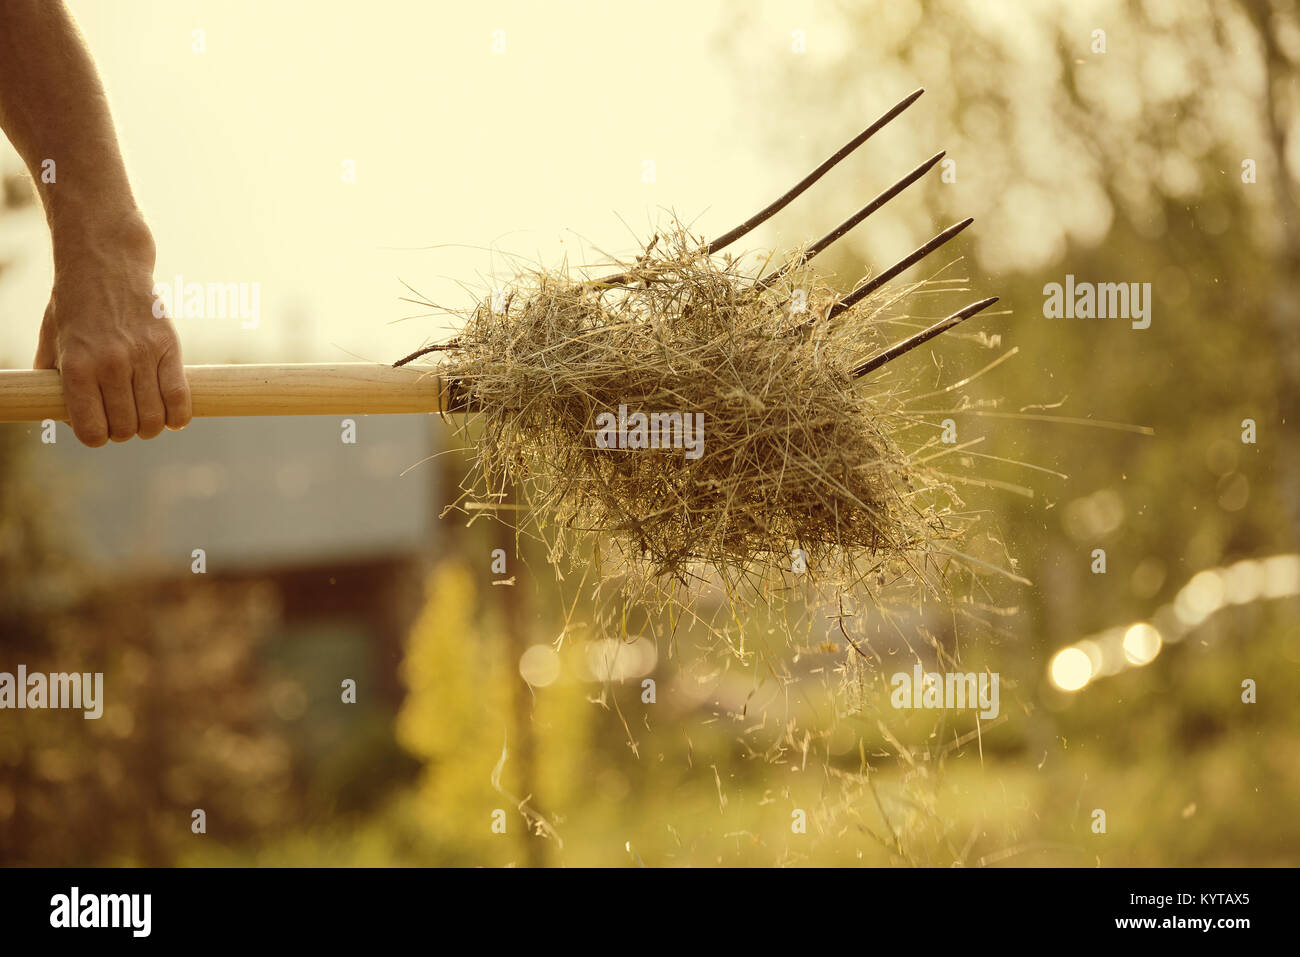 Piece of hay on the pitchfork, backlit, toned Stock Photo